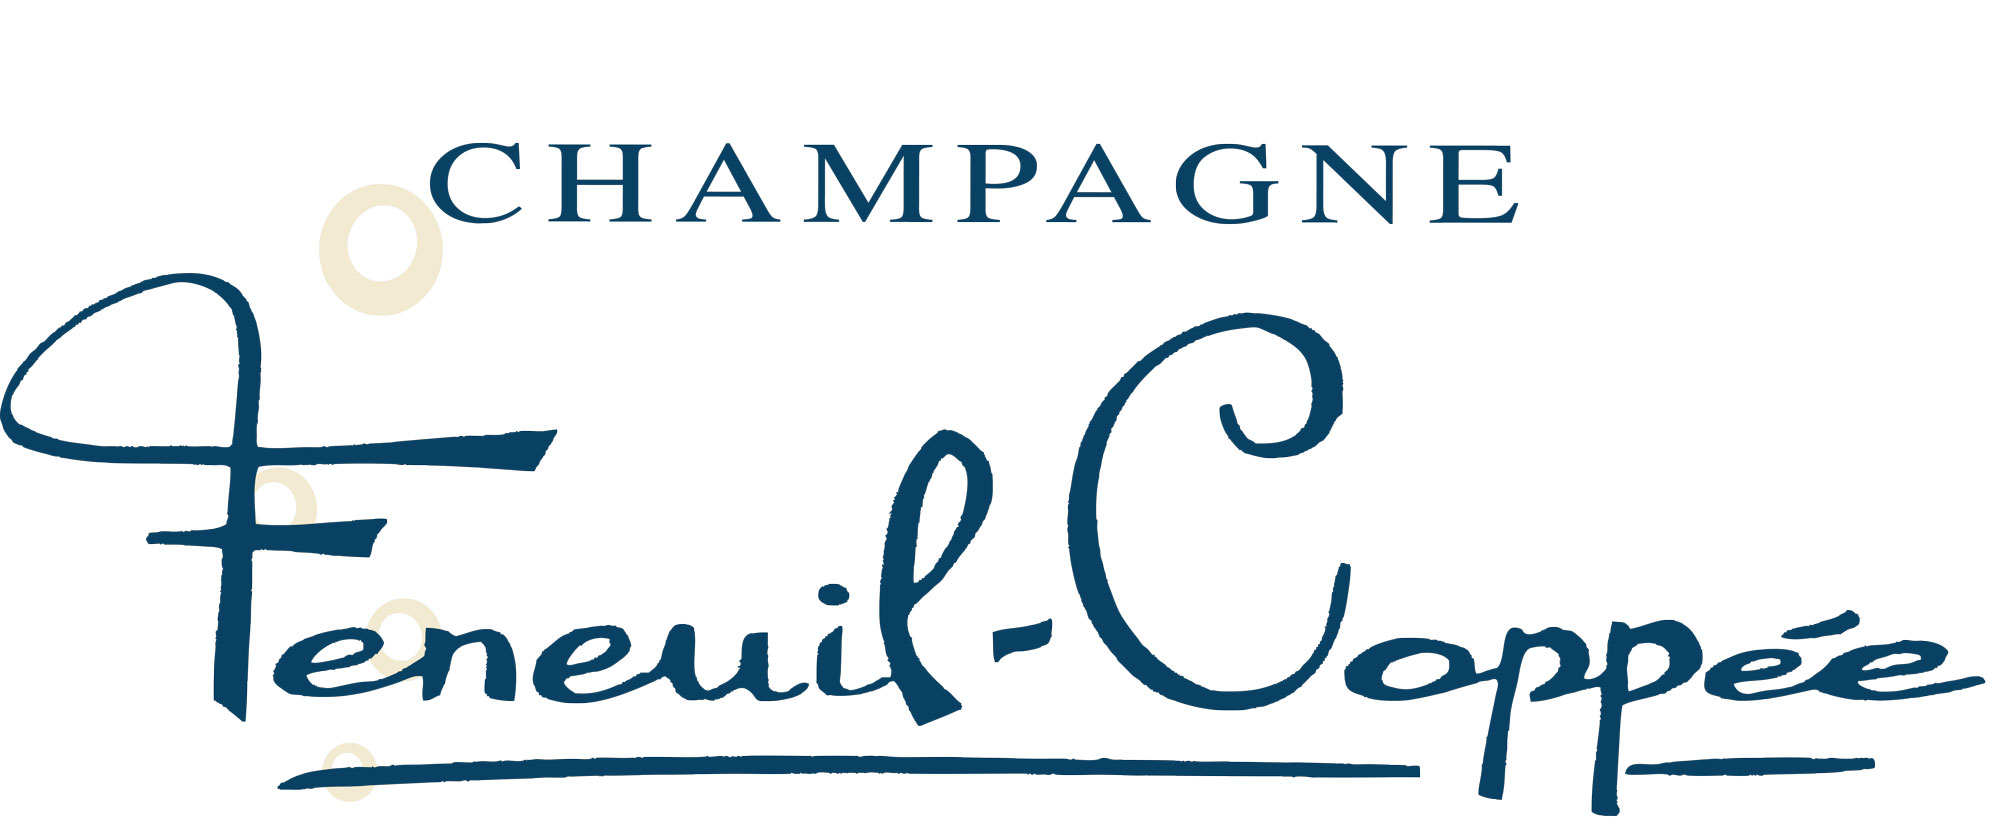 Champagne Feneuil Coppée